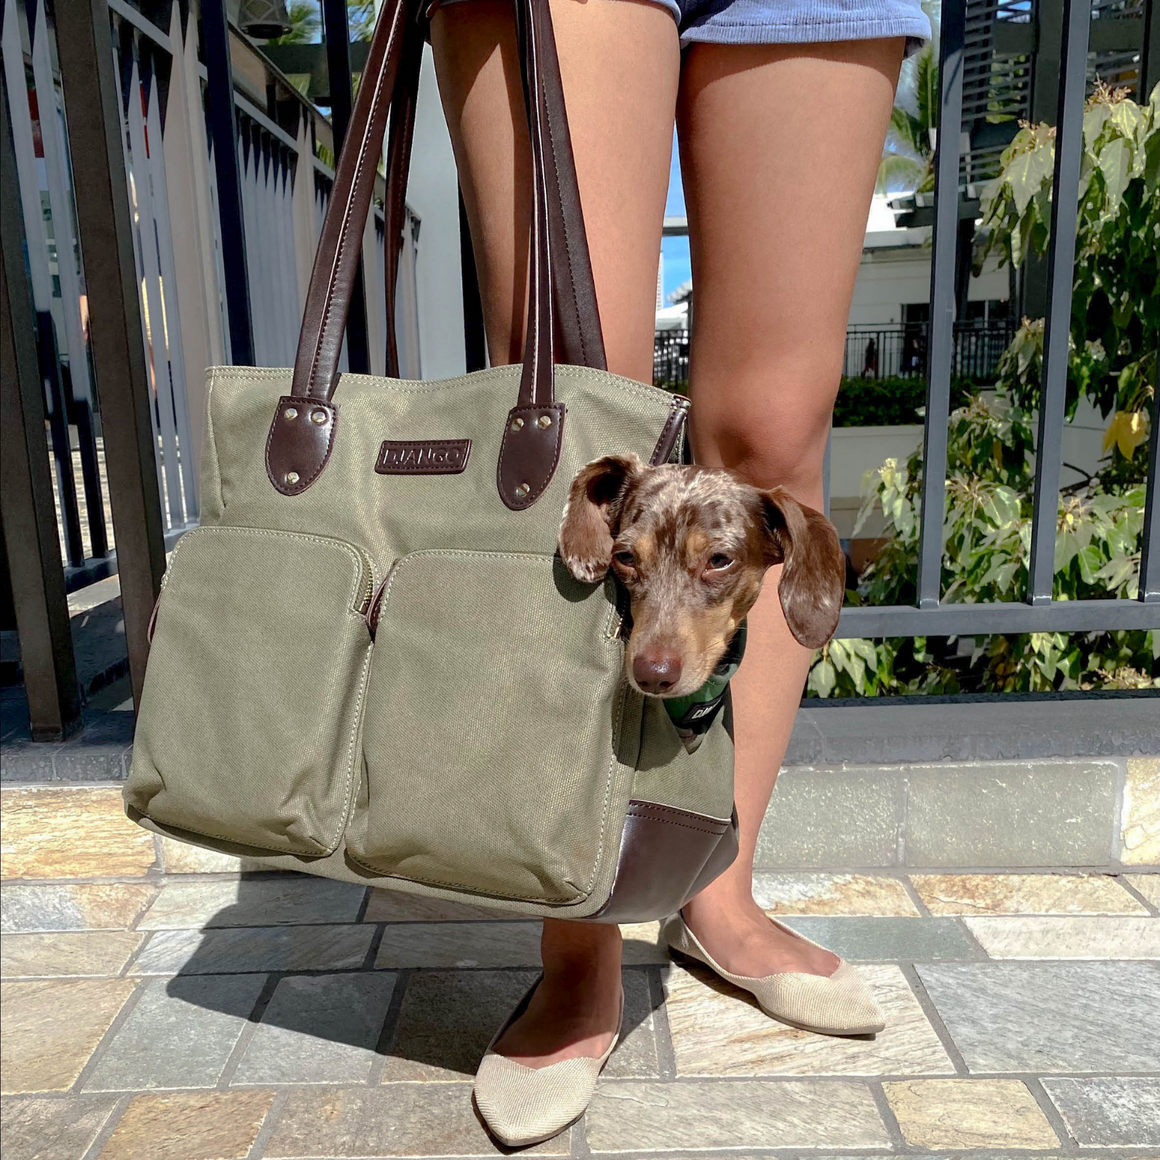 DJANGO Dog Carrier Bag - Waxed Canvas and Leather Pet Travel Tote in Olive Green - djangobrand.com